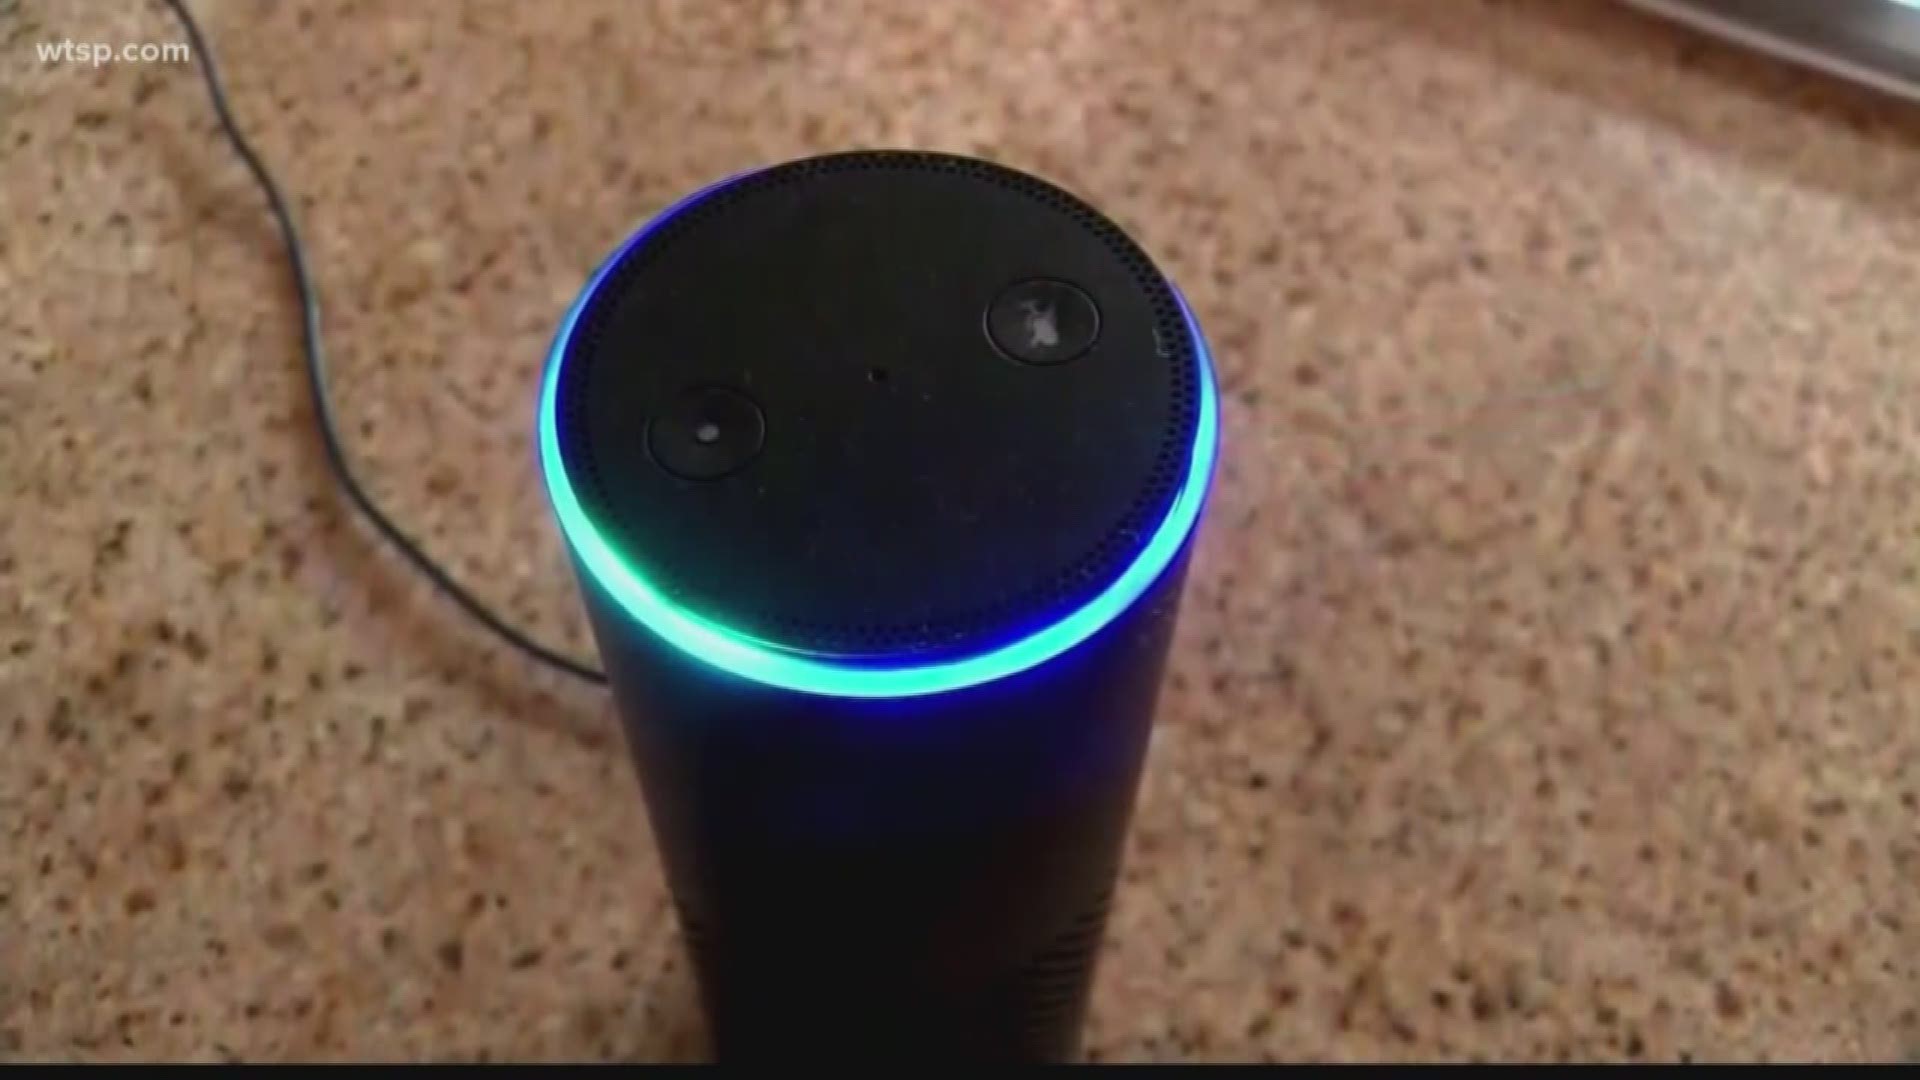 Officials say the Amazon Echo or a device similar to it was in a South Florida home where a woman was killed in July. https://bit.ly/2qeC1Uq